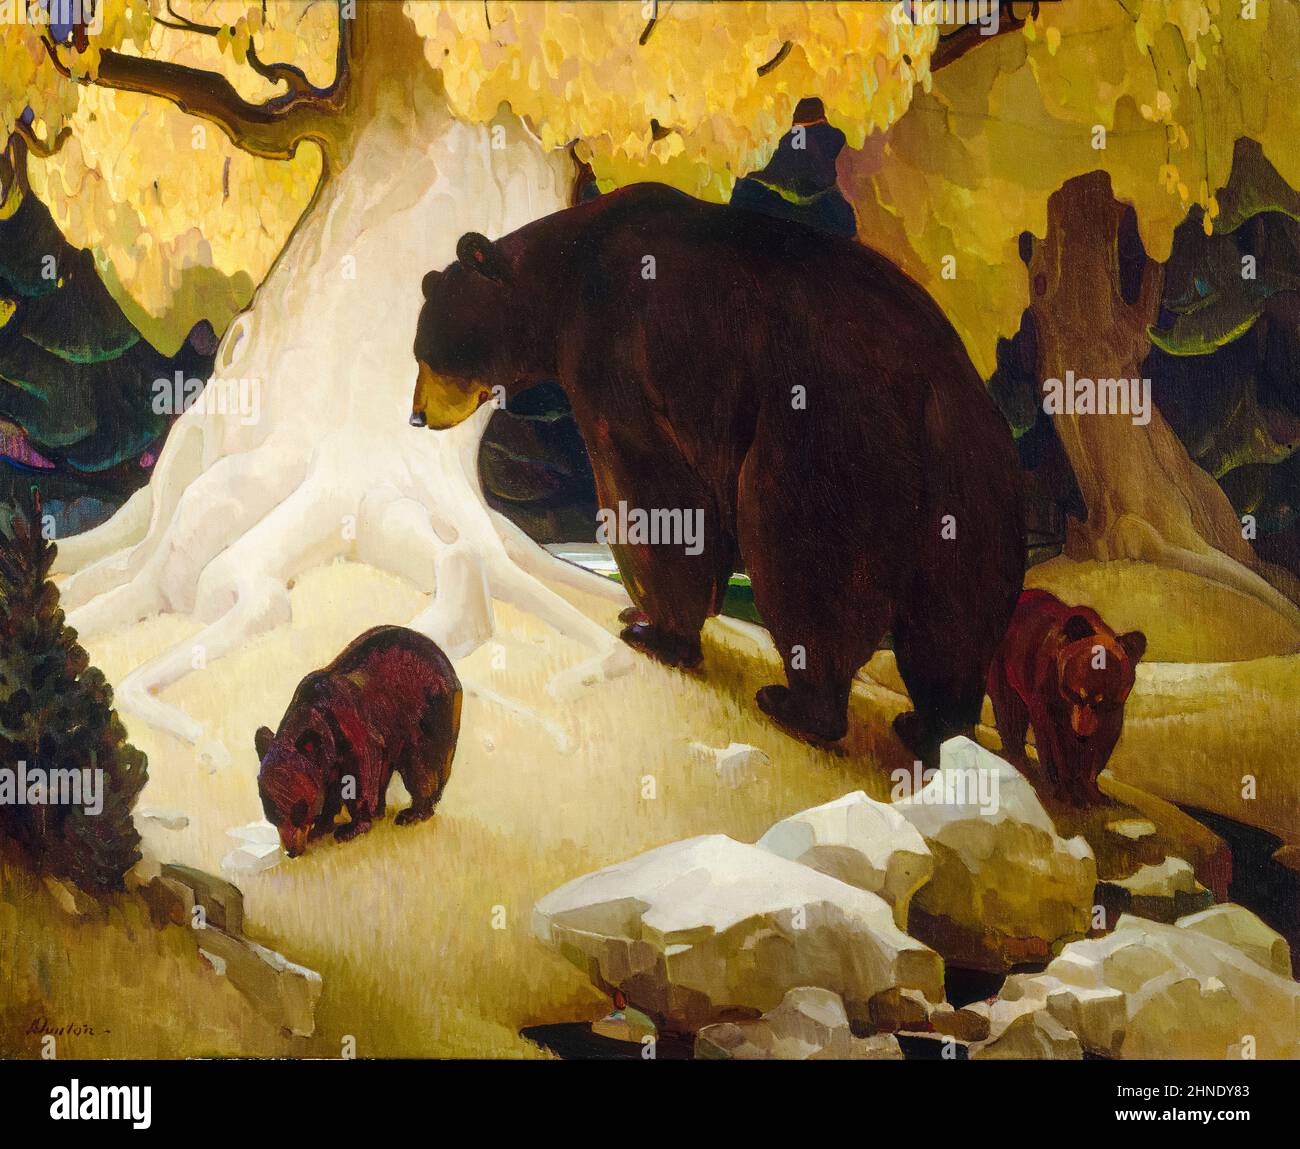 W Herbert Dunton, Fall in the Foothills, (Brown Bears in a Forest), painting, oil on canvas, 1933-1934 New Deal art Stock Photo